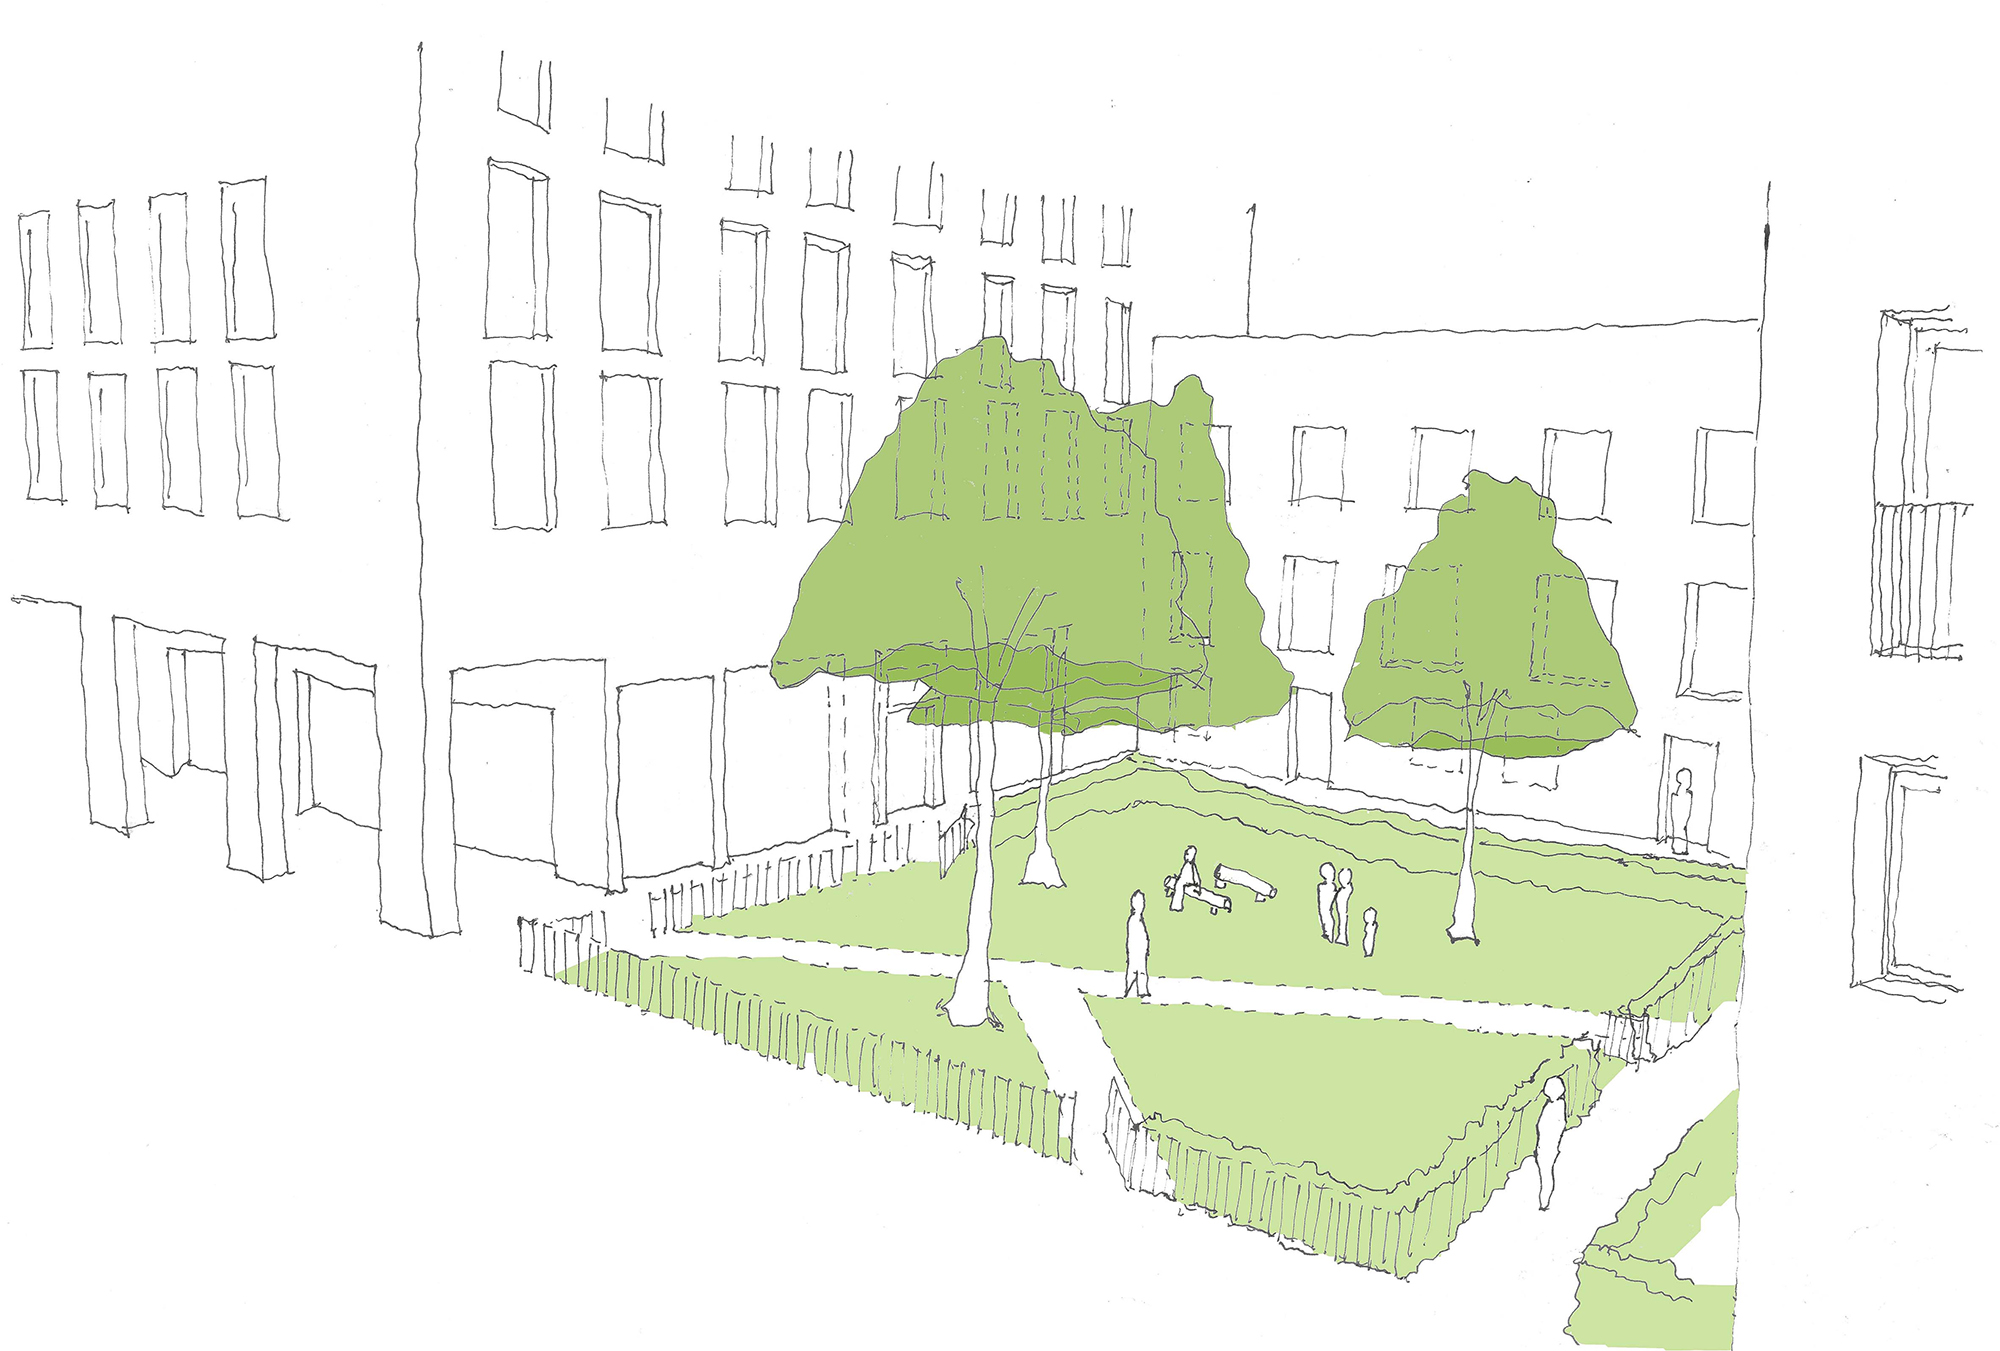 Architectural sketch of green space at Hackney tramshed